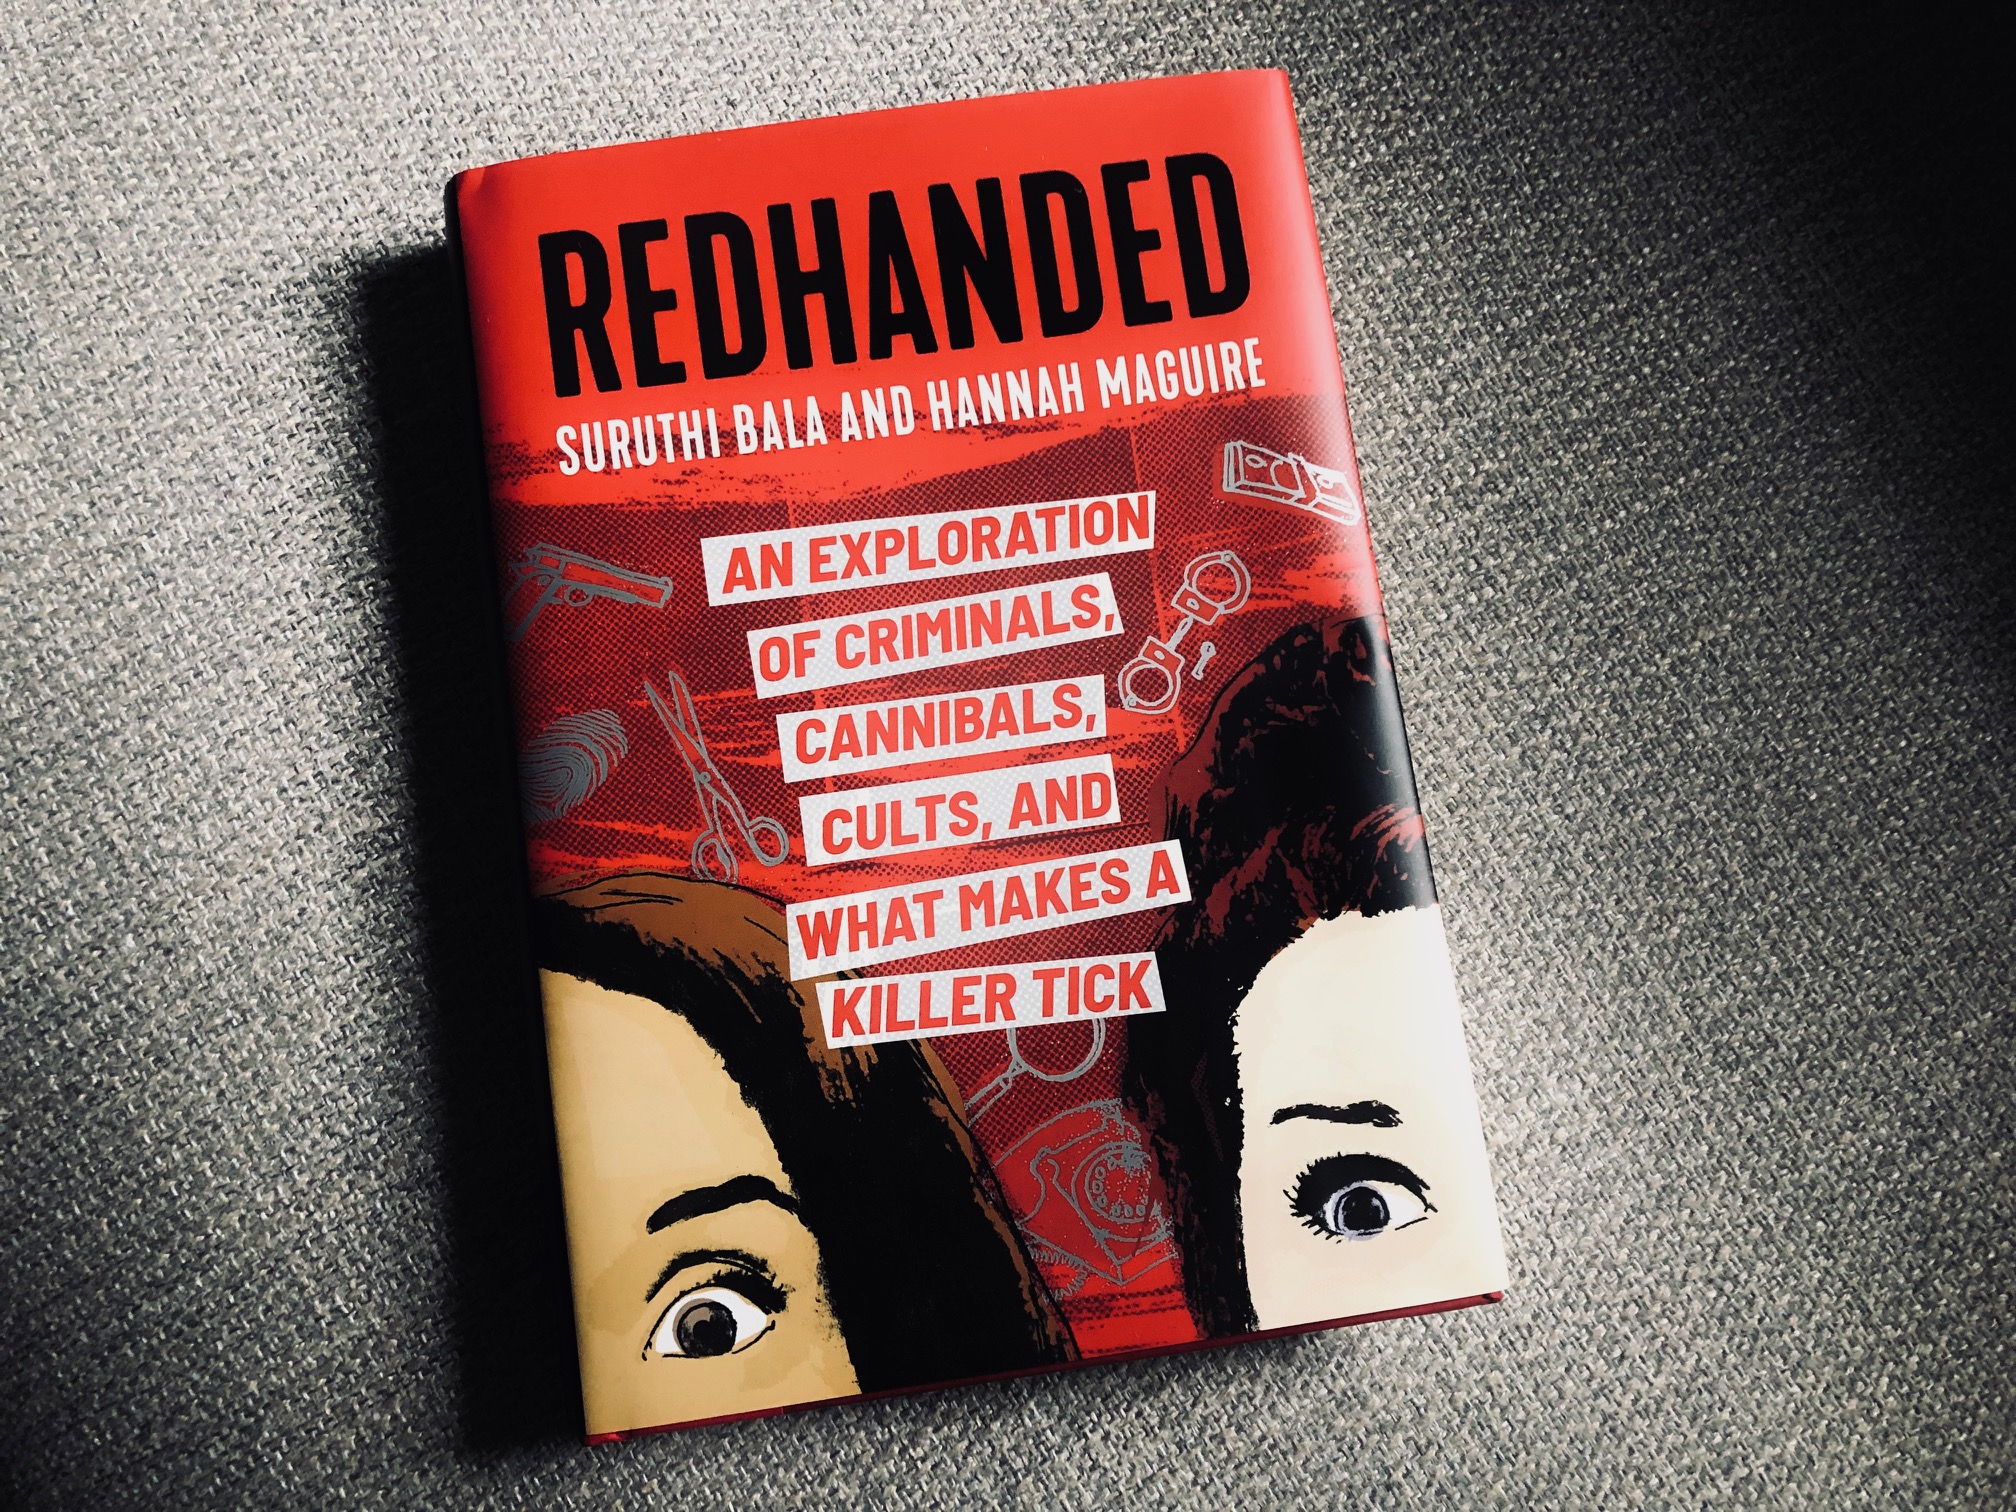 RedHanded: An Exploration of Criminals, Cannibals, Cults, and What Makes a Killer Tick book photo by Erica Robyn Reads